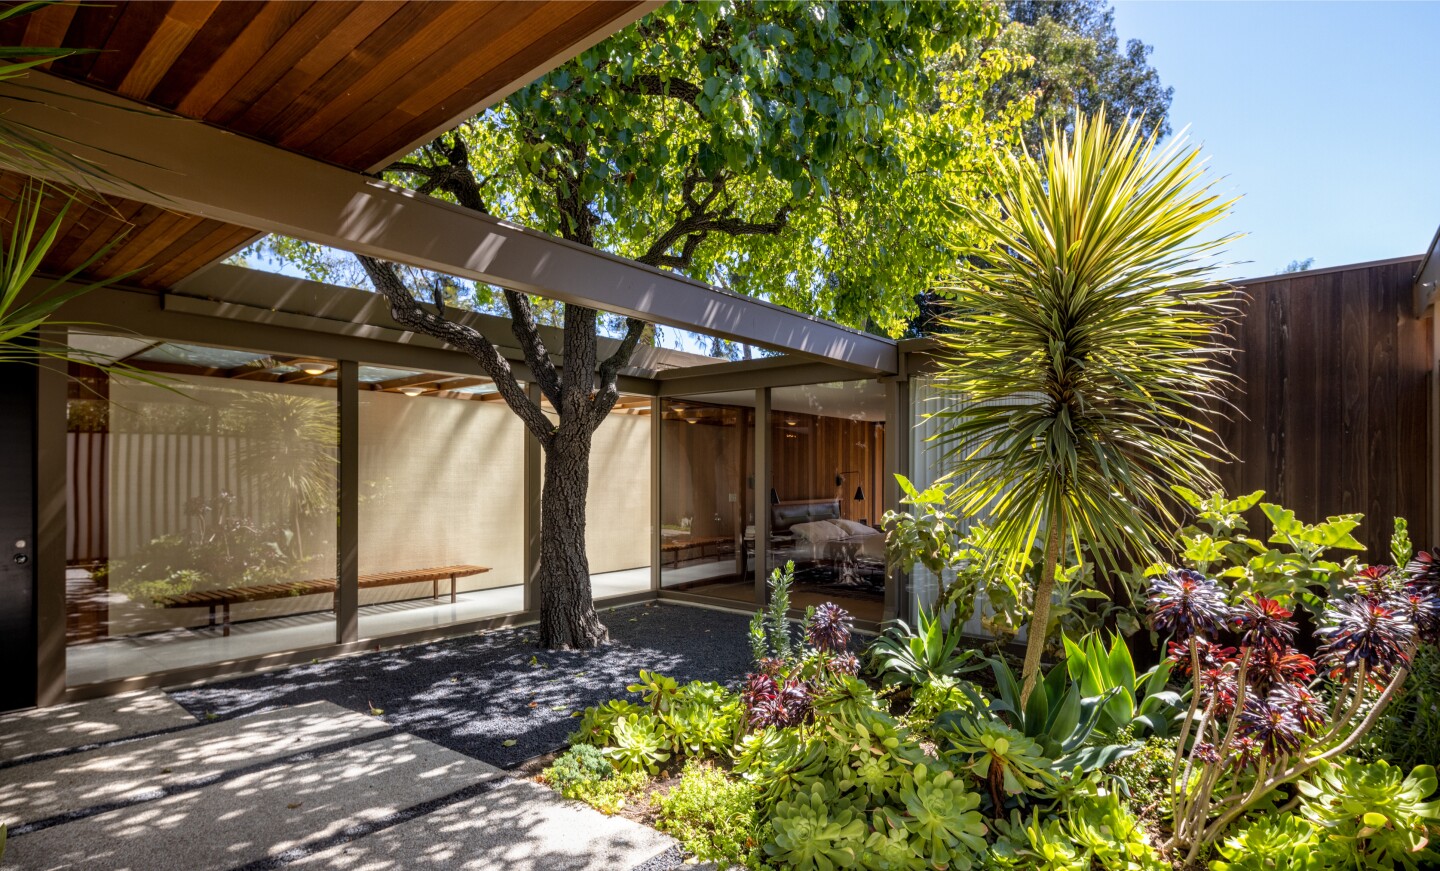 Built in 1961, the single-story home features Midcentury charms such as a courtyard entry, sky-lit hallways and warm wood-and-glass living spaces.